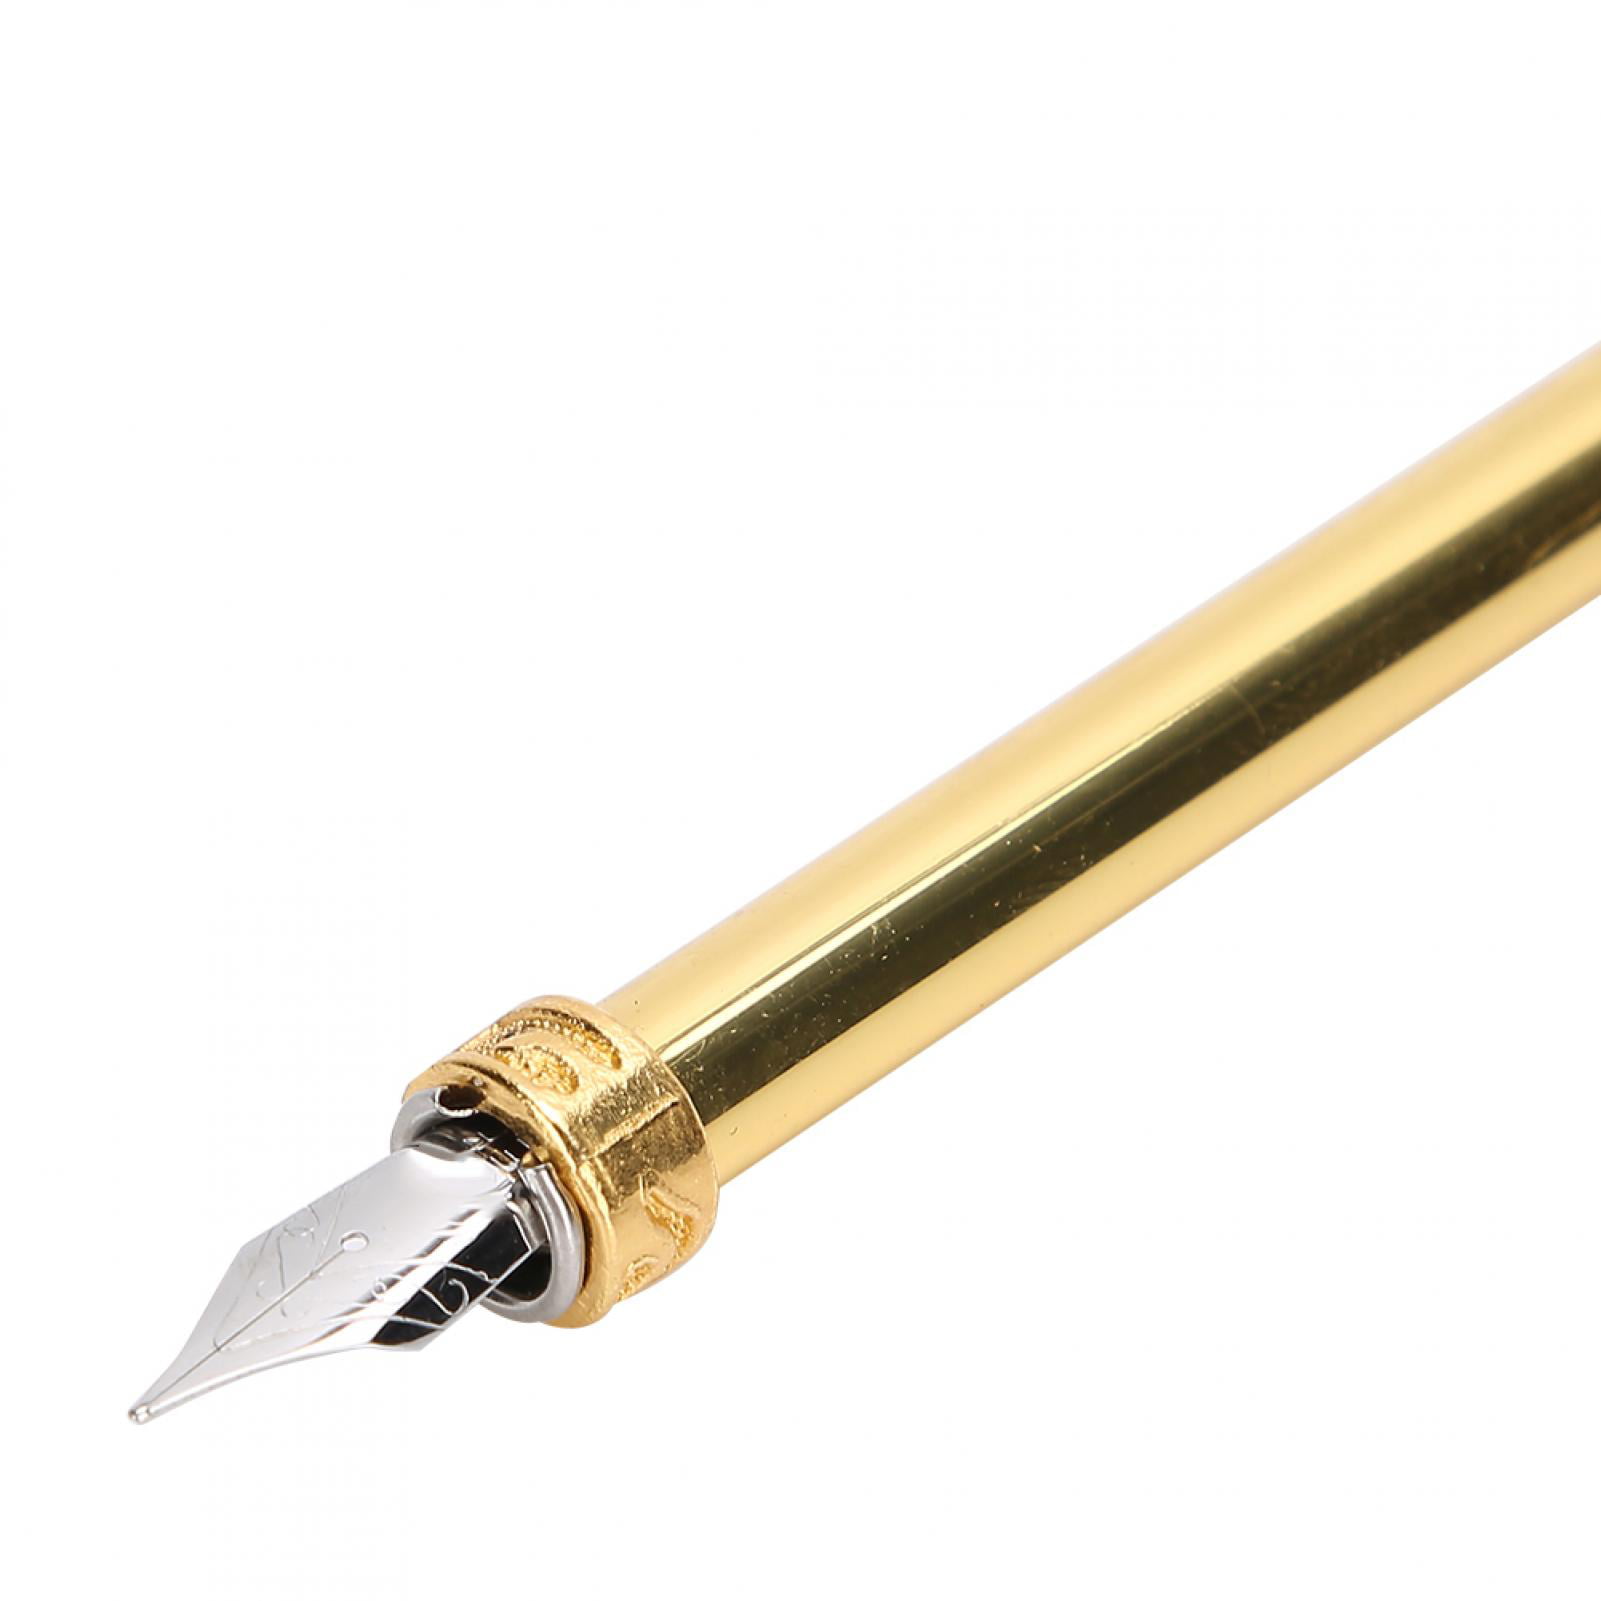 Feather Pen,Dip Feather Pen,Gold and Pink Feather Pen Business Fountain Dipped in Ink Retro British Fancy Calligraphy,There is a spring clip inside,you can easily replace the pen tip,easily to operate